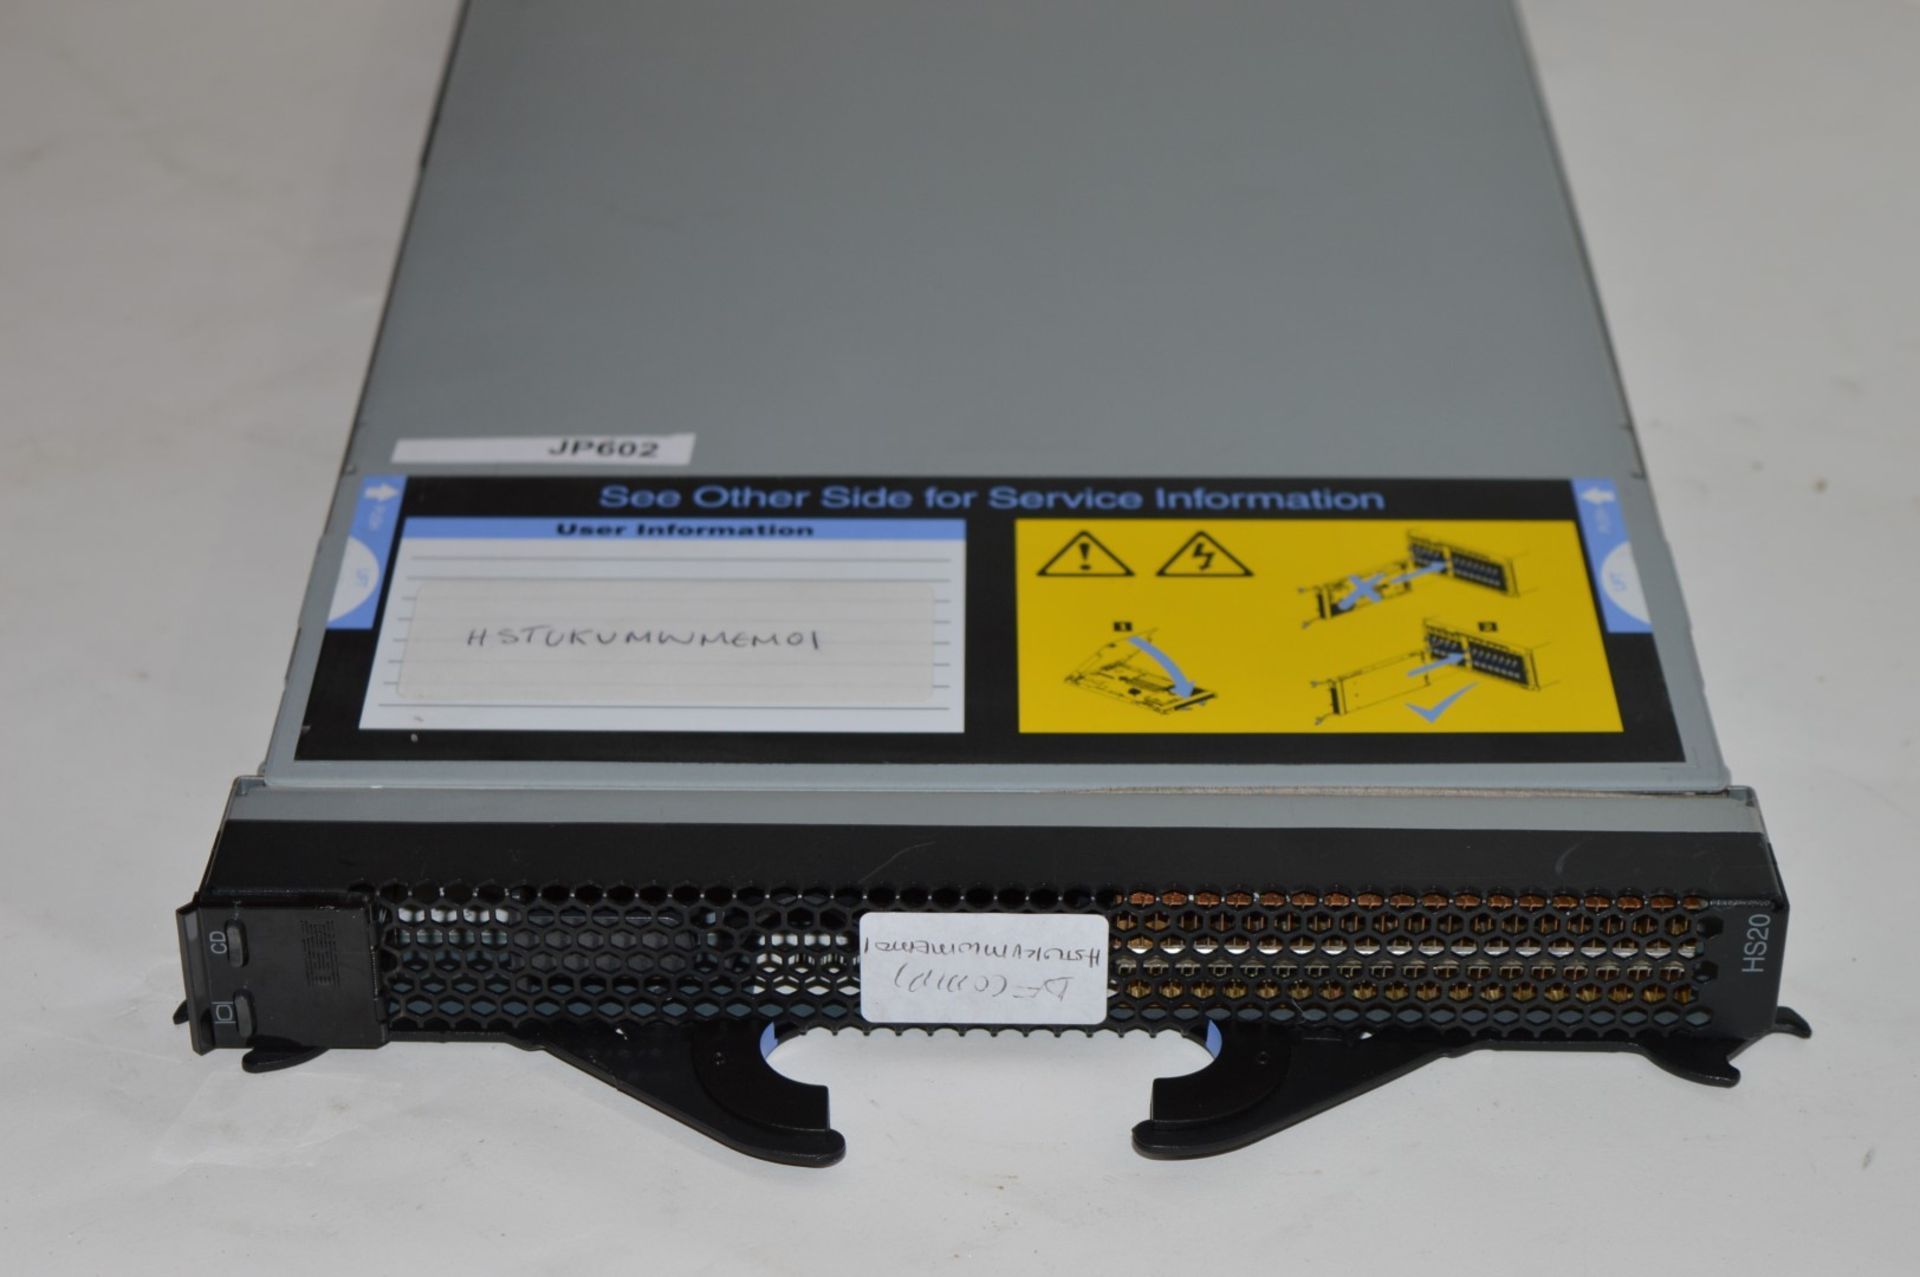 1 x IBM HS20 Blade Server - Model 35G - Includes 1 x Xeon Processors and 3gb Ram - CL400 - Ref JP203 - Image 4 of 4